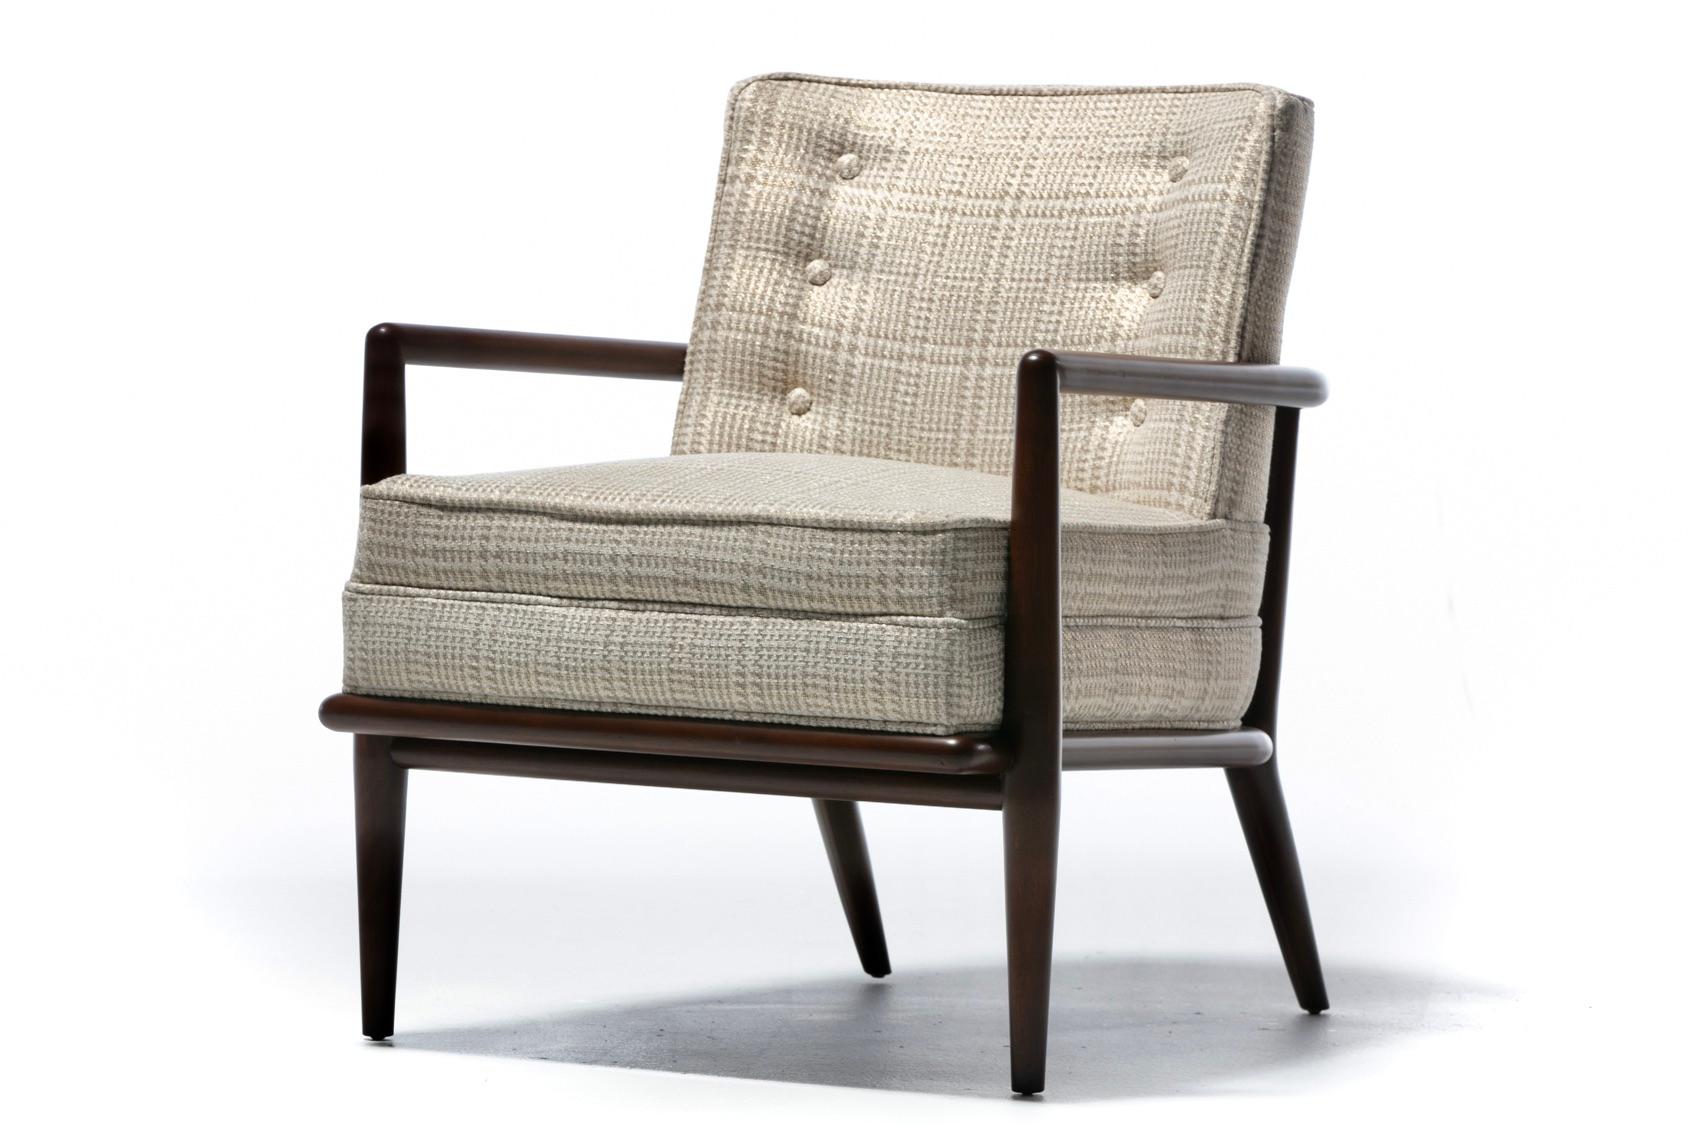 Mid-20th Century Pair of T. H. Robsjohn-Gibbings Lounge Chairs in Romo Fabric for Widdicomb For Sale